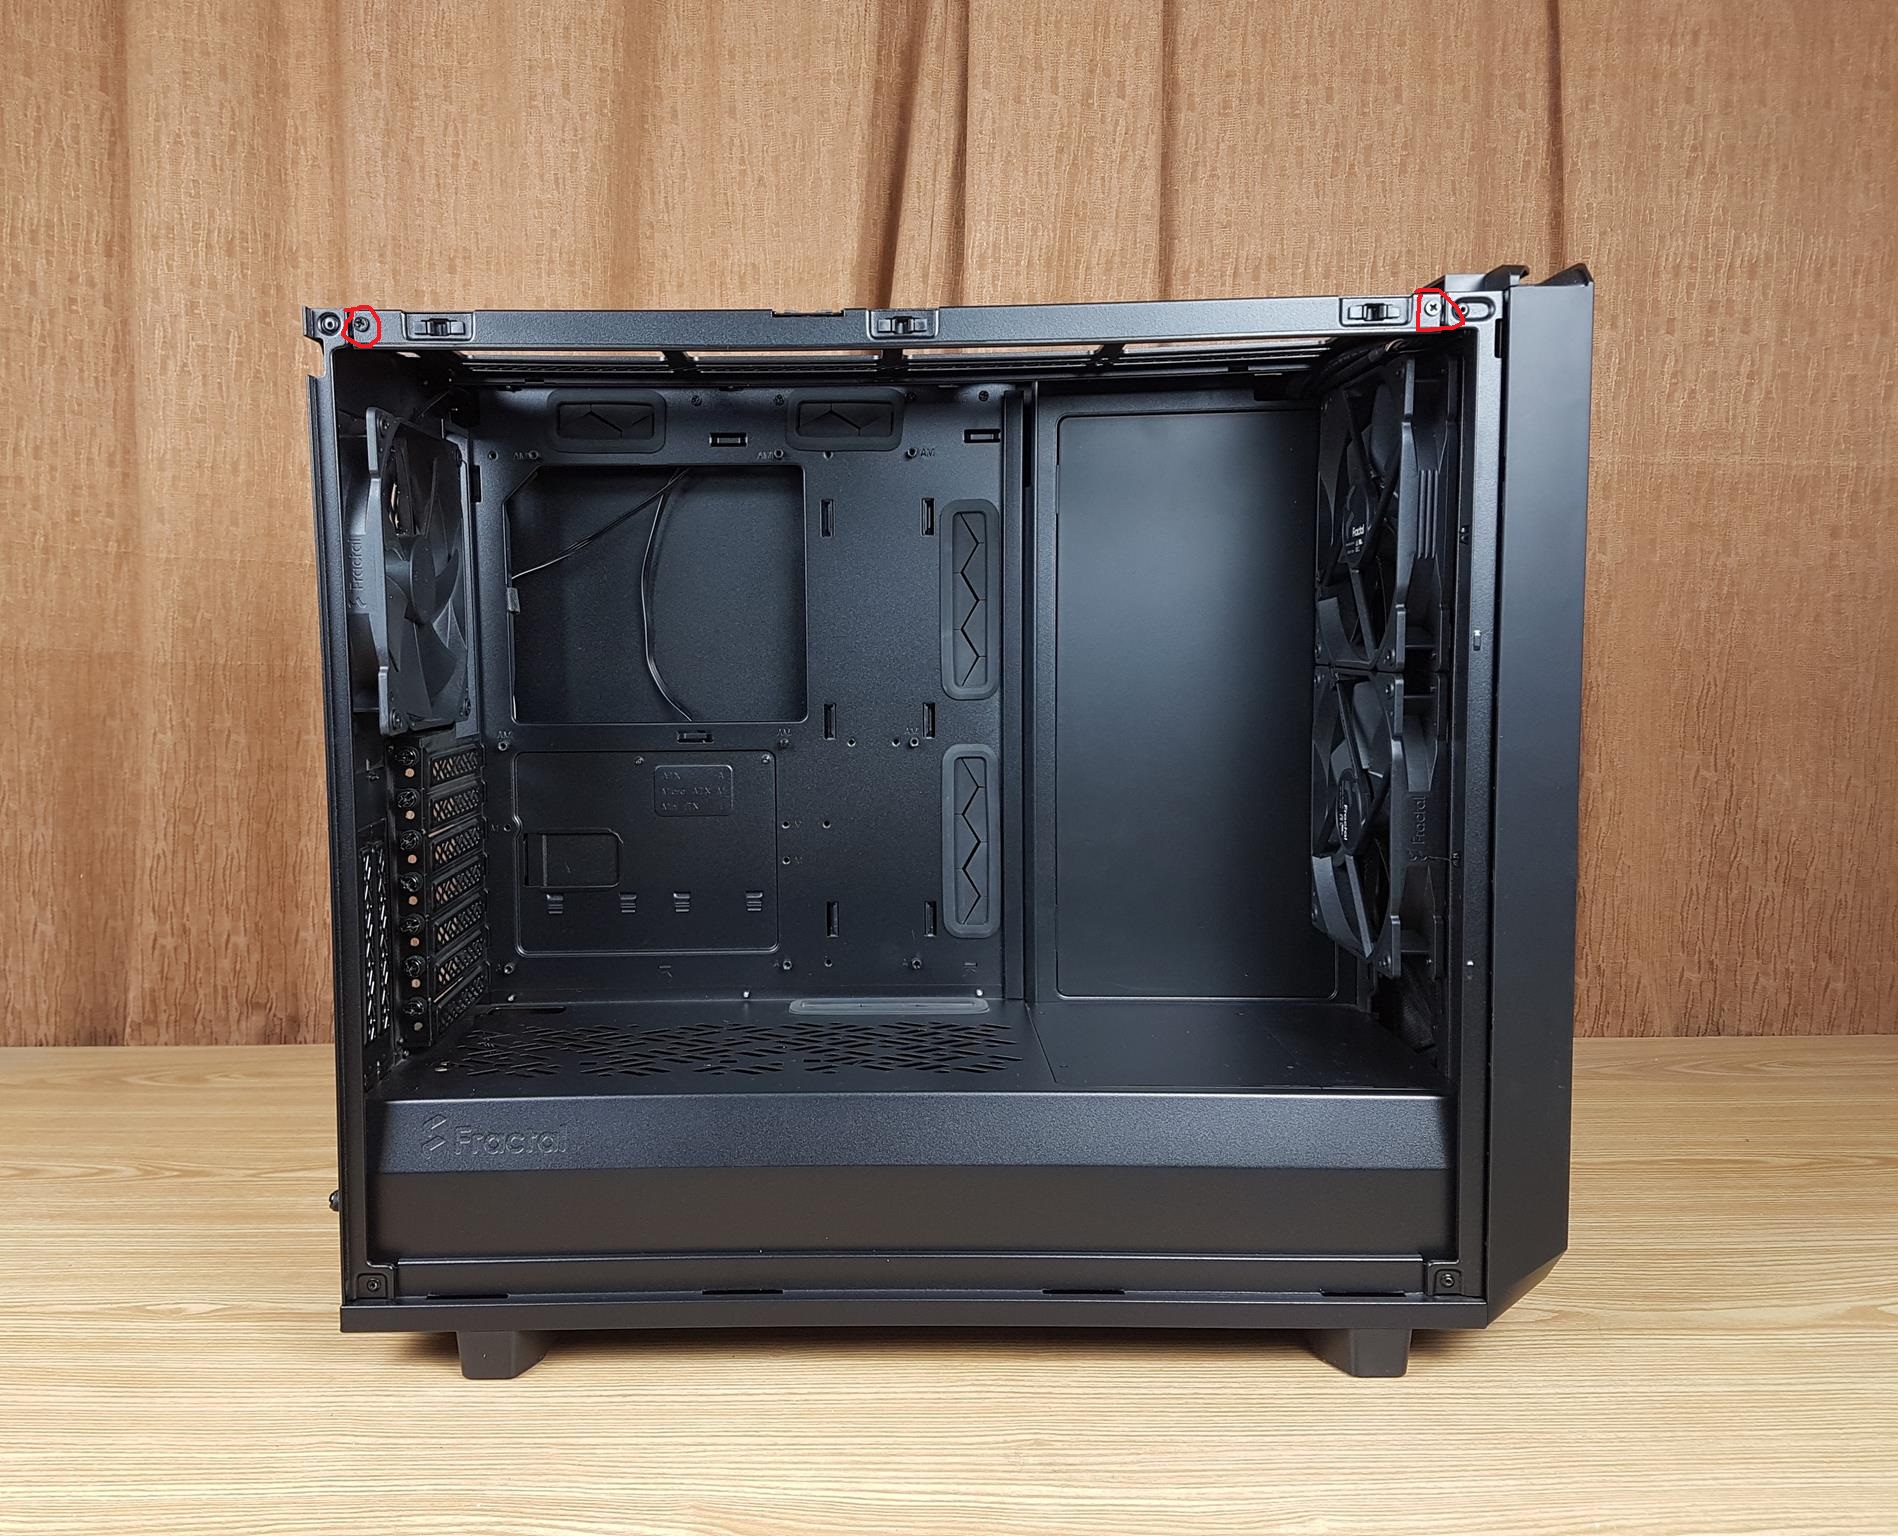 Fractal Design Meshify 2 — Side view of the case with top panel and dust filter removed